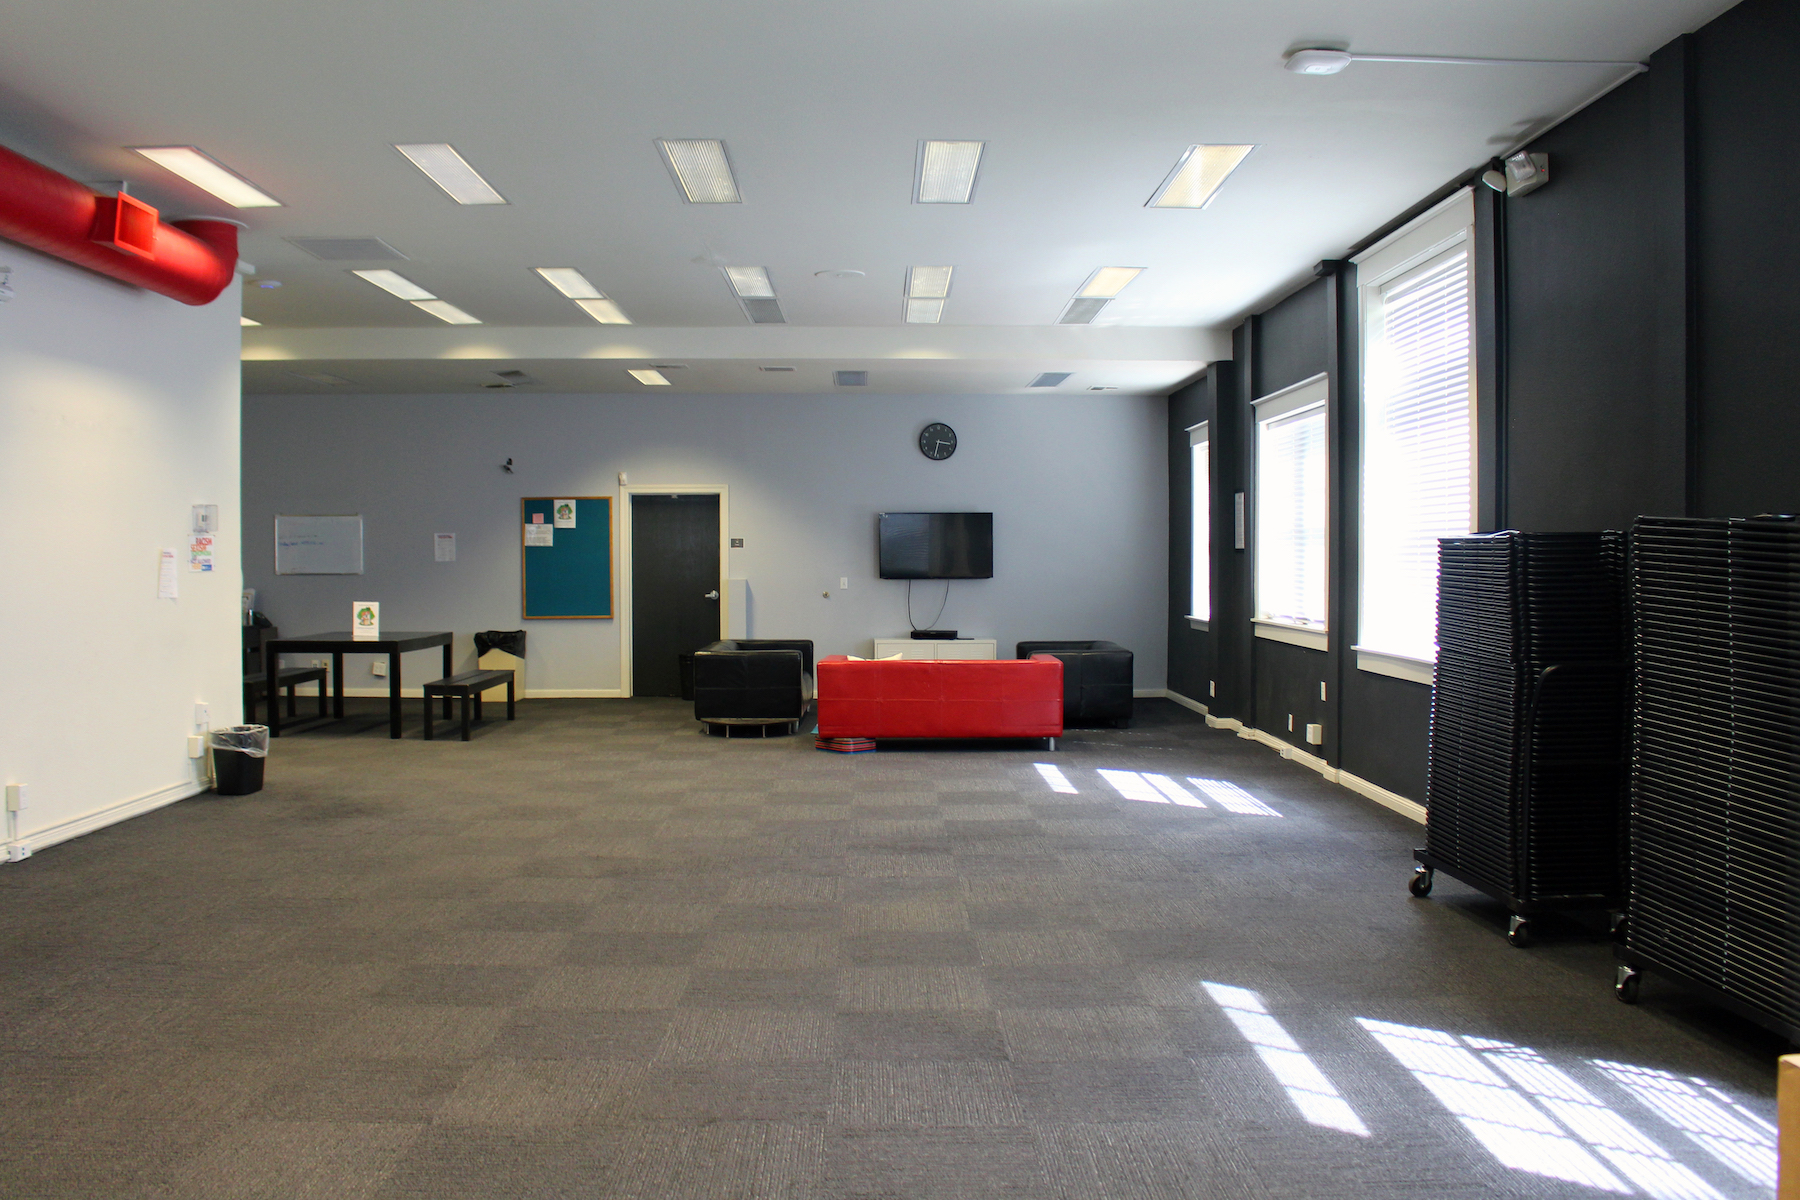 Picture of community resources room at the Sac LGBT Center